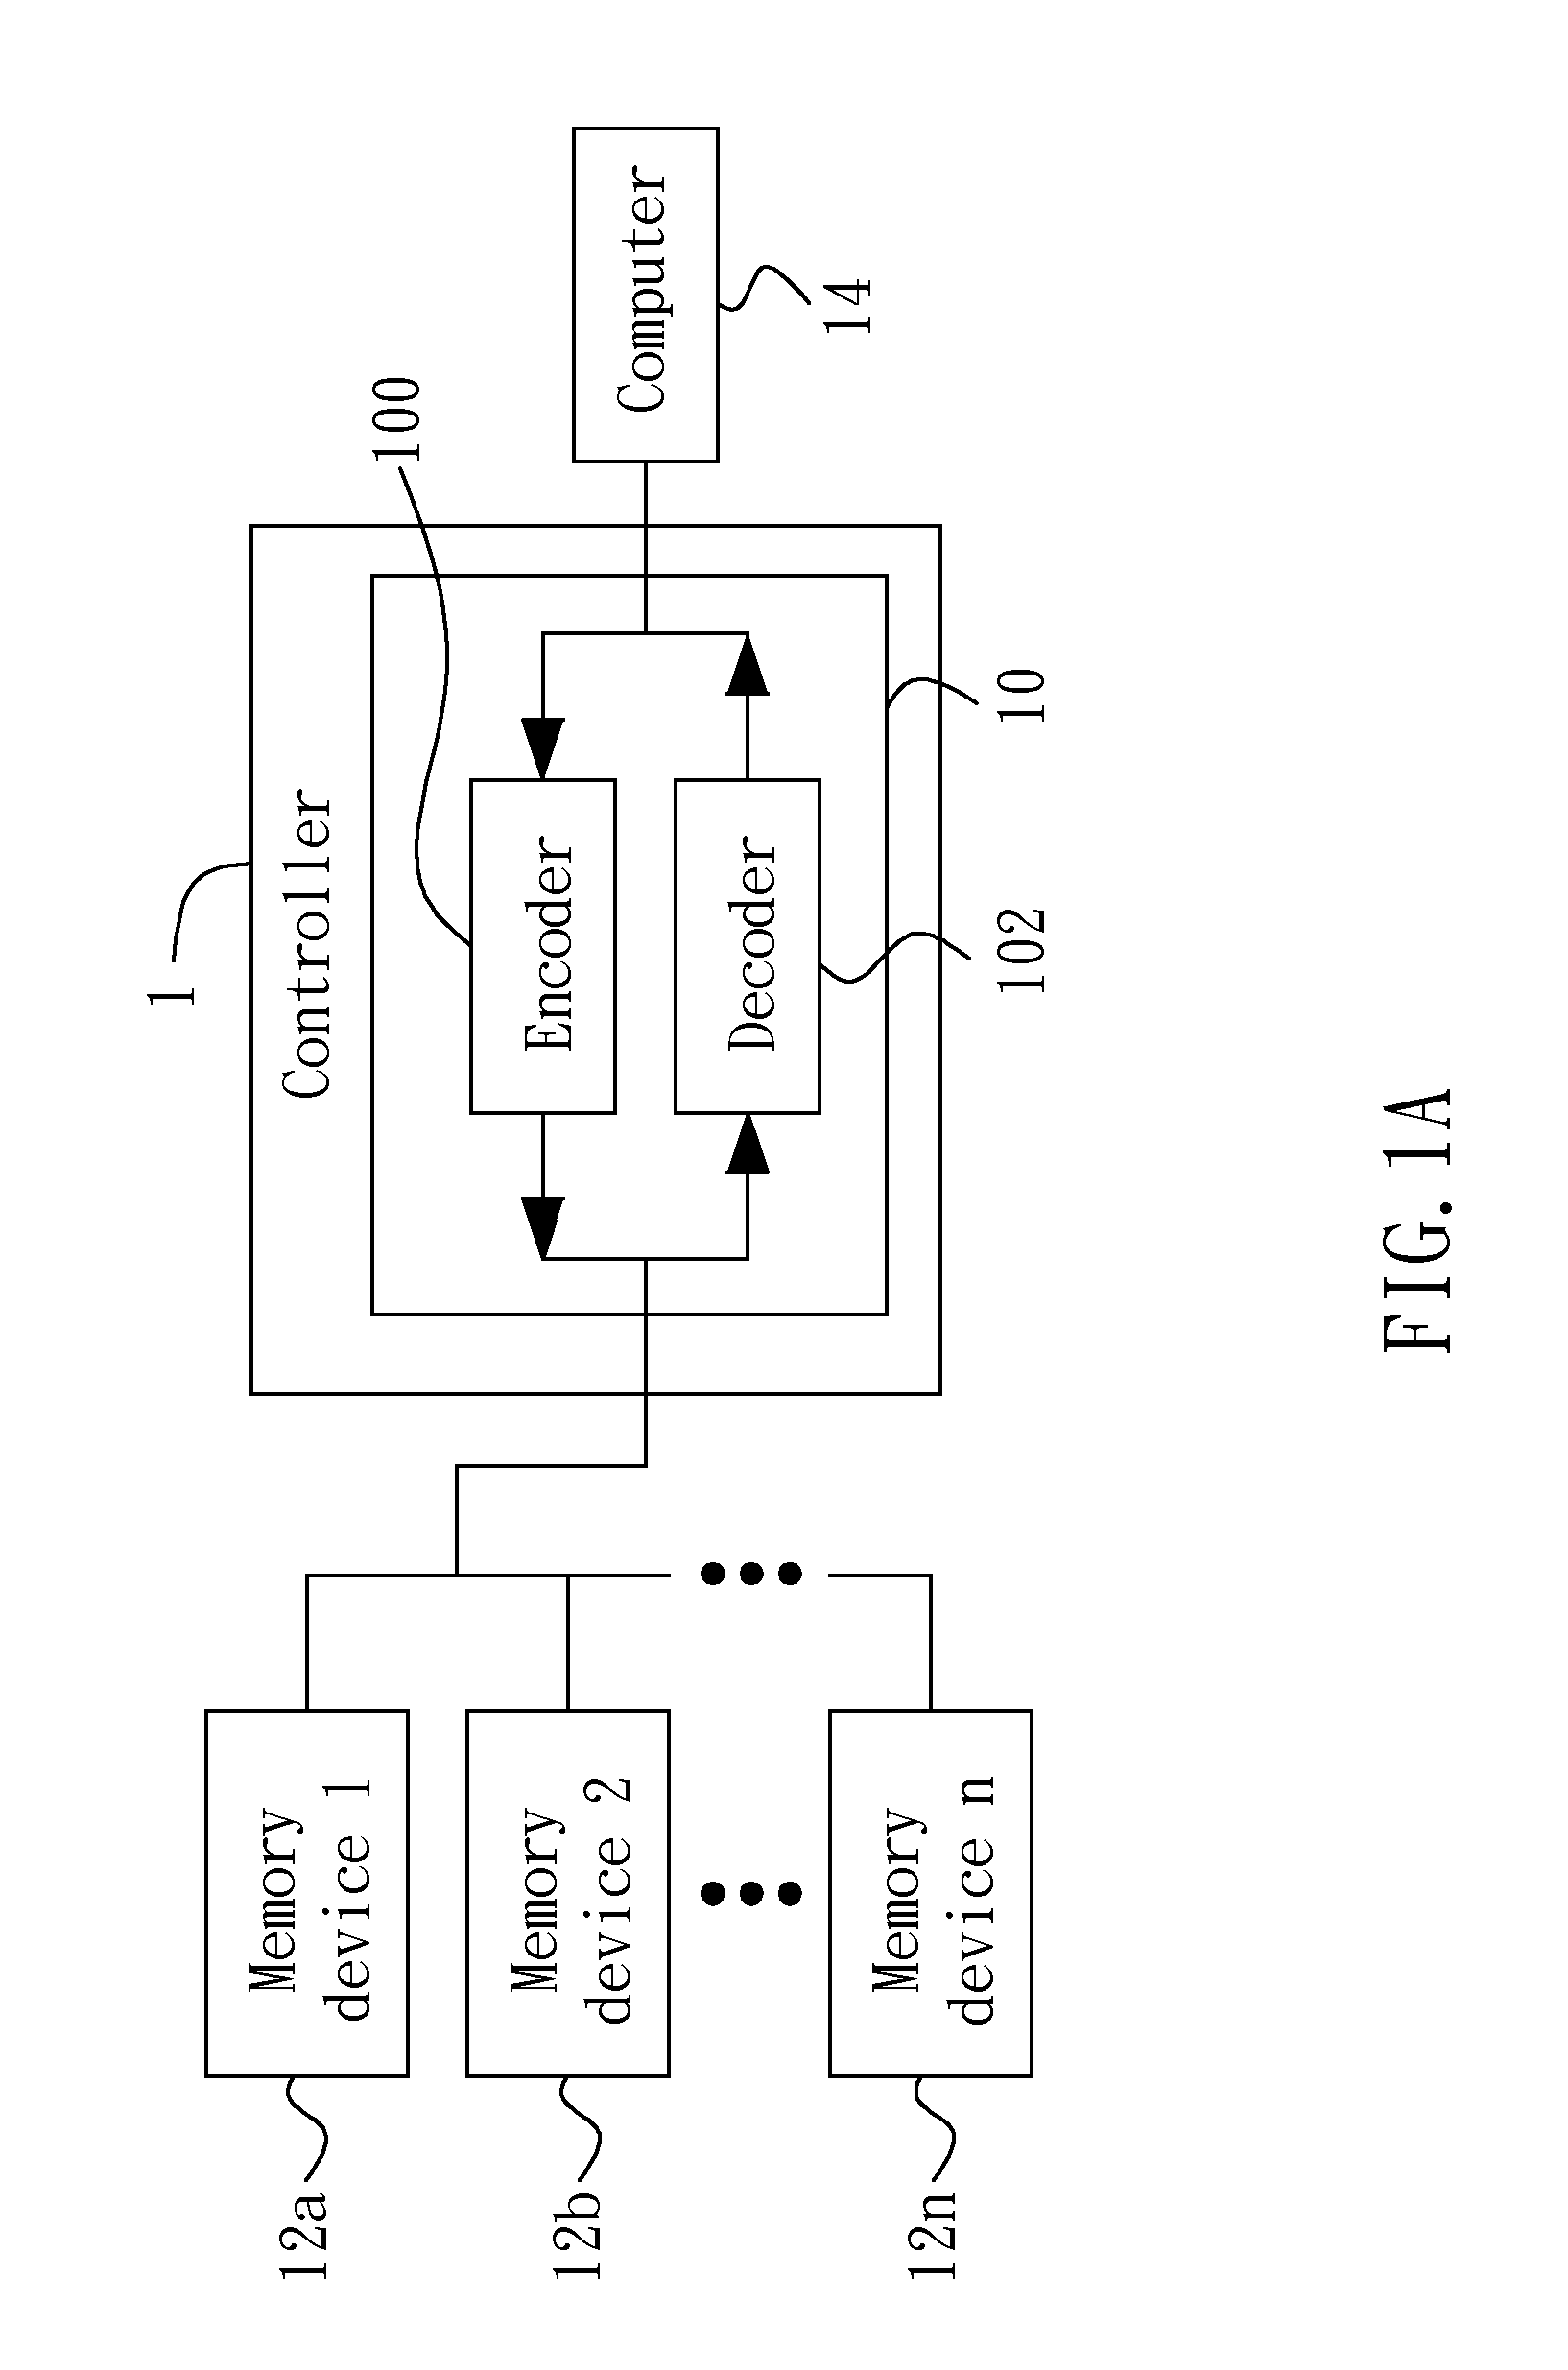 Configurable coding system and method of multiple eccs